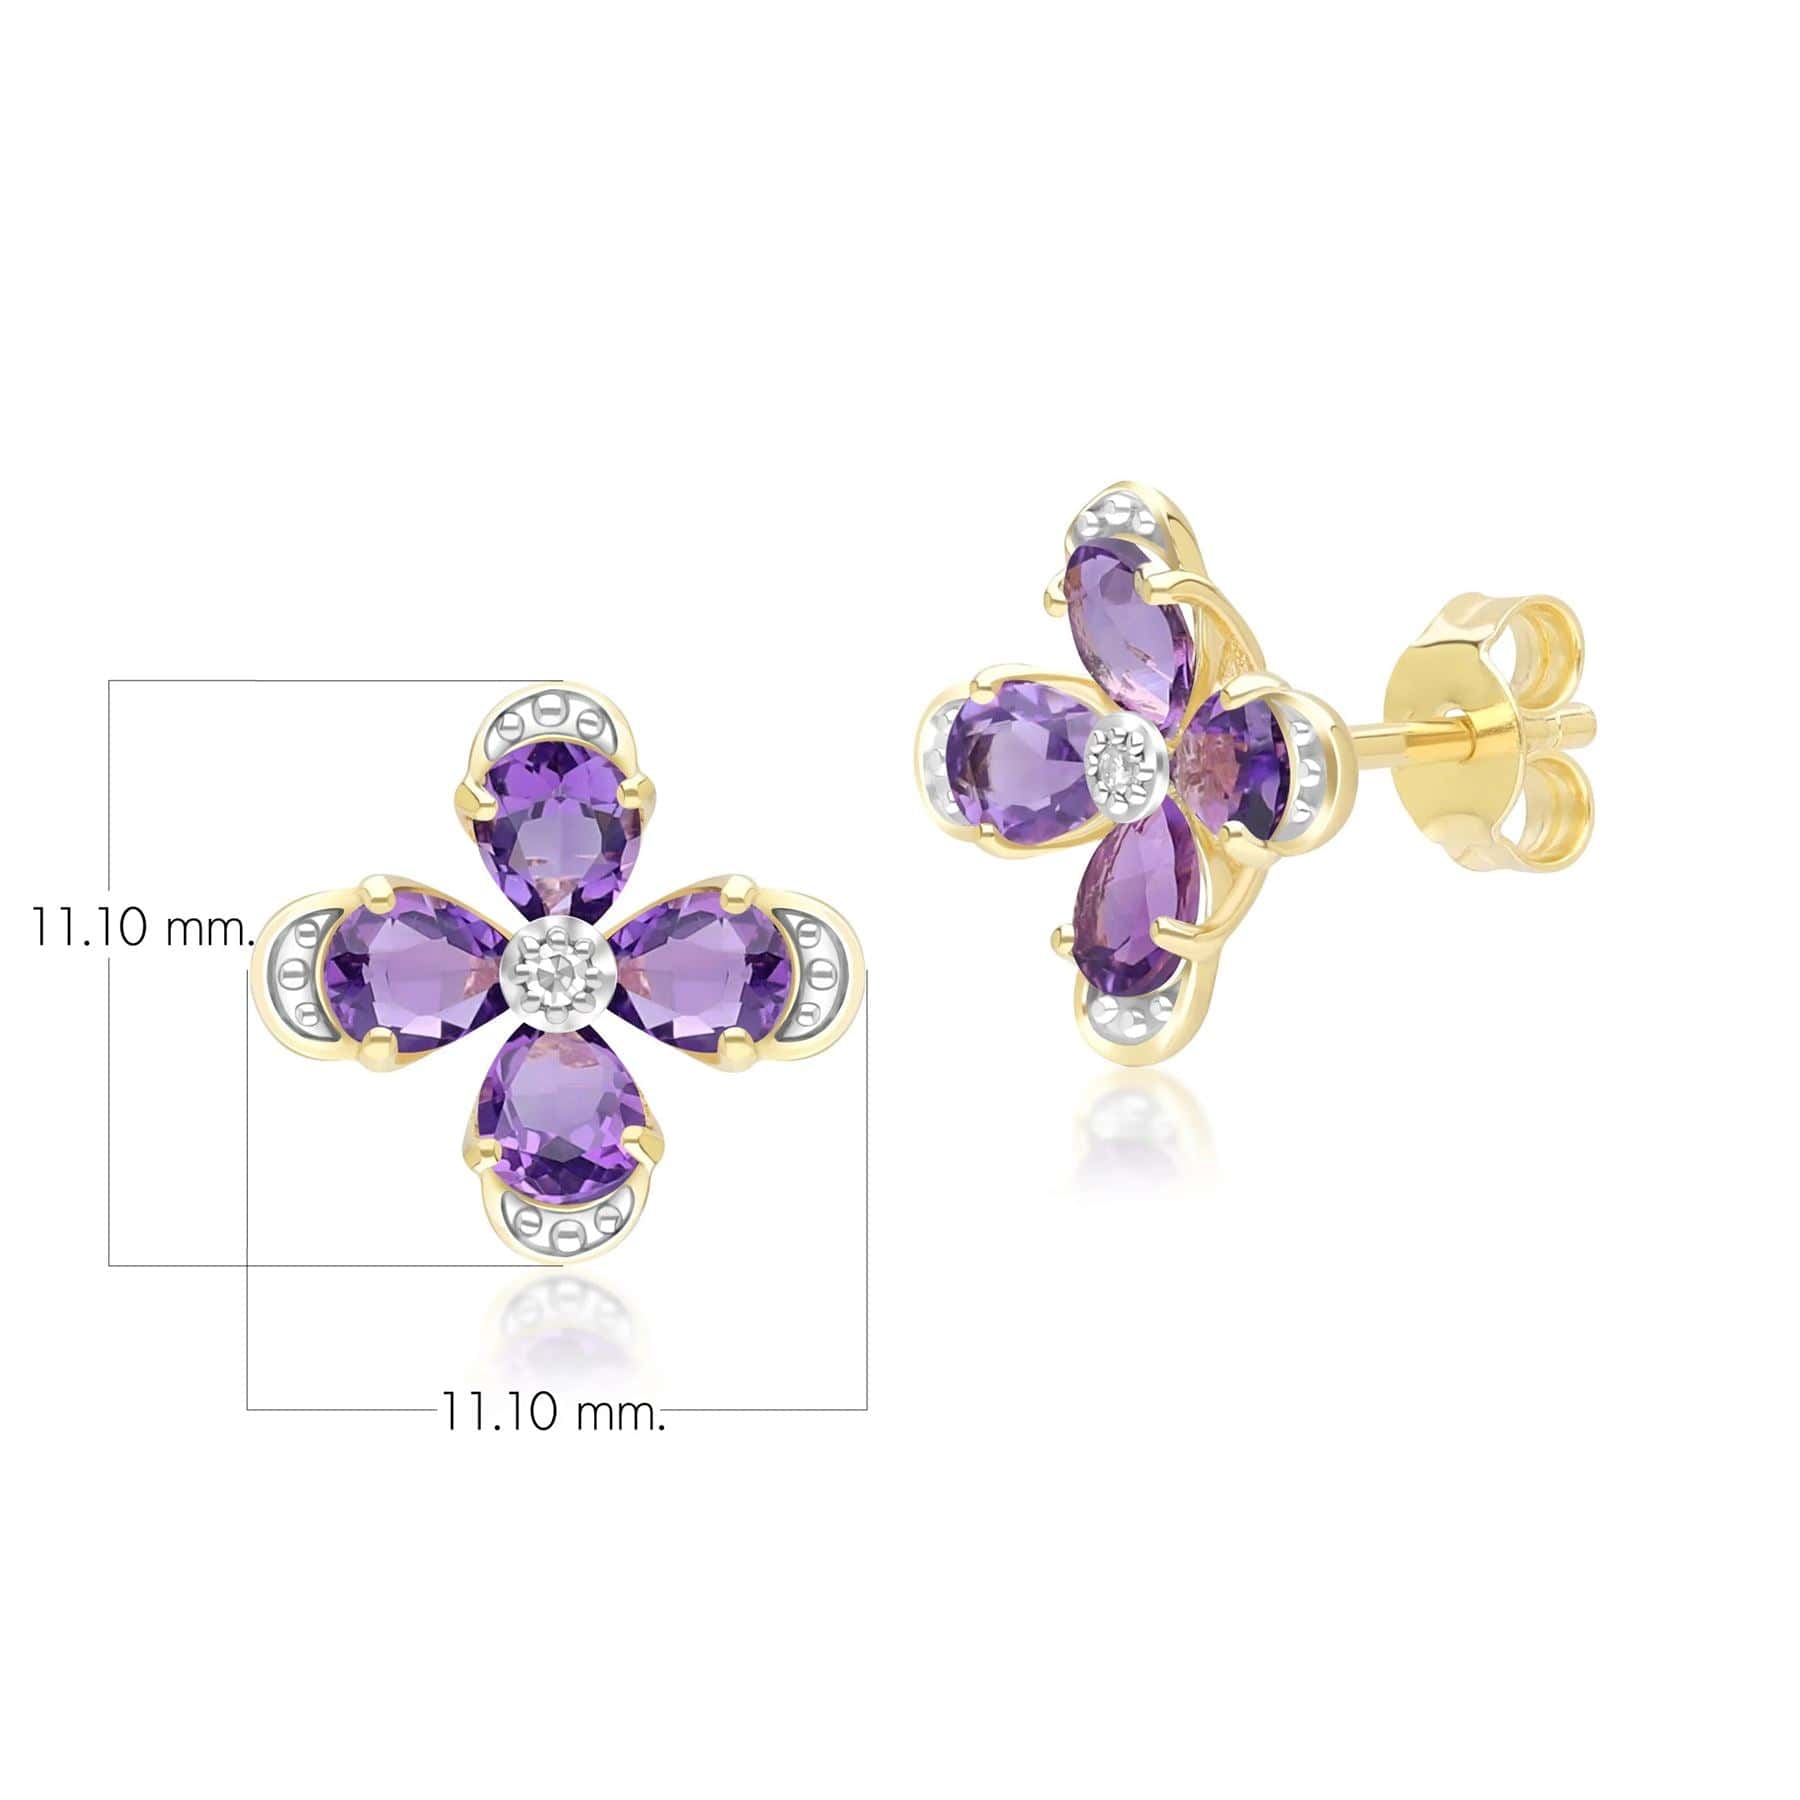 Floral Amethyst & Diamond Stud Earrings in 9ct Yellow Gold